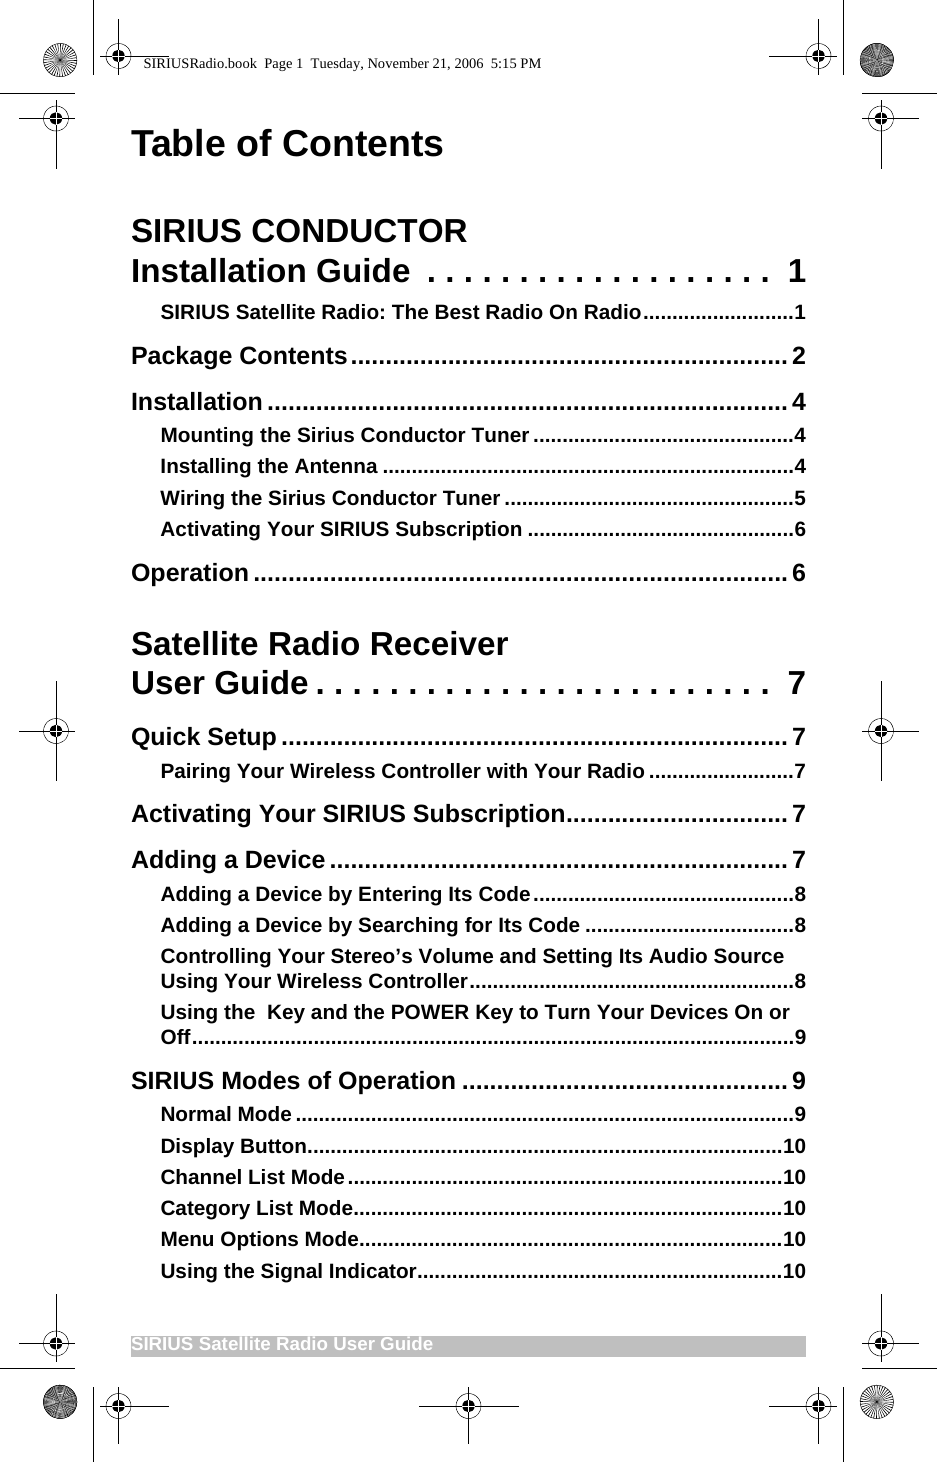 SIRIUS Satellite Radio User Guide                                                     Table of ContentsSIRIUS CONDUCTORInstallation Guide  . . . . . . . . . . . . . . . . . . .  1SIRIUS Satellite Radio: The Best Radio On Radio..........................1Package Contents............................................................... 2Installation ...........................................................................4Mounting the Sirius Conductor Tuner.............................................4Installing the Antenna .......................................................................4Wiring the Sirius Conductor Tuner ..................................................5Activating Your SIRIUS Subscription ..............................................6Operation .............................................................................6Satellite Radio Receiver User Guide . . . . . . . . . . . . . . . . . . . . . . . . .  7Quick Setup ......................................................................... 7Pairing Your Wireless Controller with Your Radio .........................7Activating Your SIRIUS Subscription................................7Adding a Device .................................................................. 7Adding a Device by Entering Its Code.............................................8Adding a Device by Searching for Its Code ....................................8Controlling Your Stereo’s Volume and Setting Its Audio Source Using Your Wireless Controller........................................................8Using the  Key and the POWER Key to Turn Your Devices On or Off........................................................................................................9SIRIUS Modes of Operation ............................................... 9Normal Mode ......................................................................................9Display Button..................................................................................10Channel List Mode...........................................................................10Category List Mode..........................................................................10Menu Options Mode.........................................................................10Using the Signal Indicator...............................................................10SIRIUSRadio.book  Page 1  Tuesday, November 21, 2006  5:15 PM